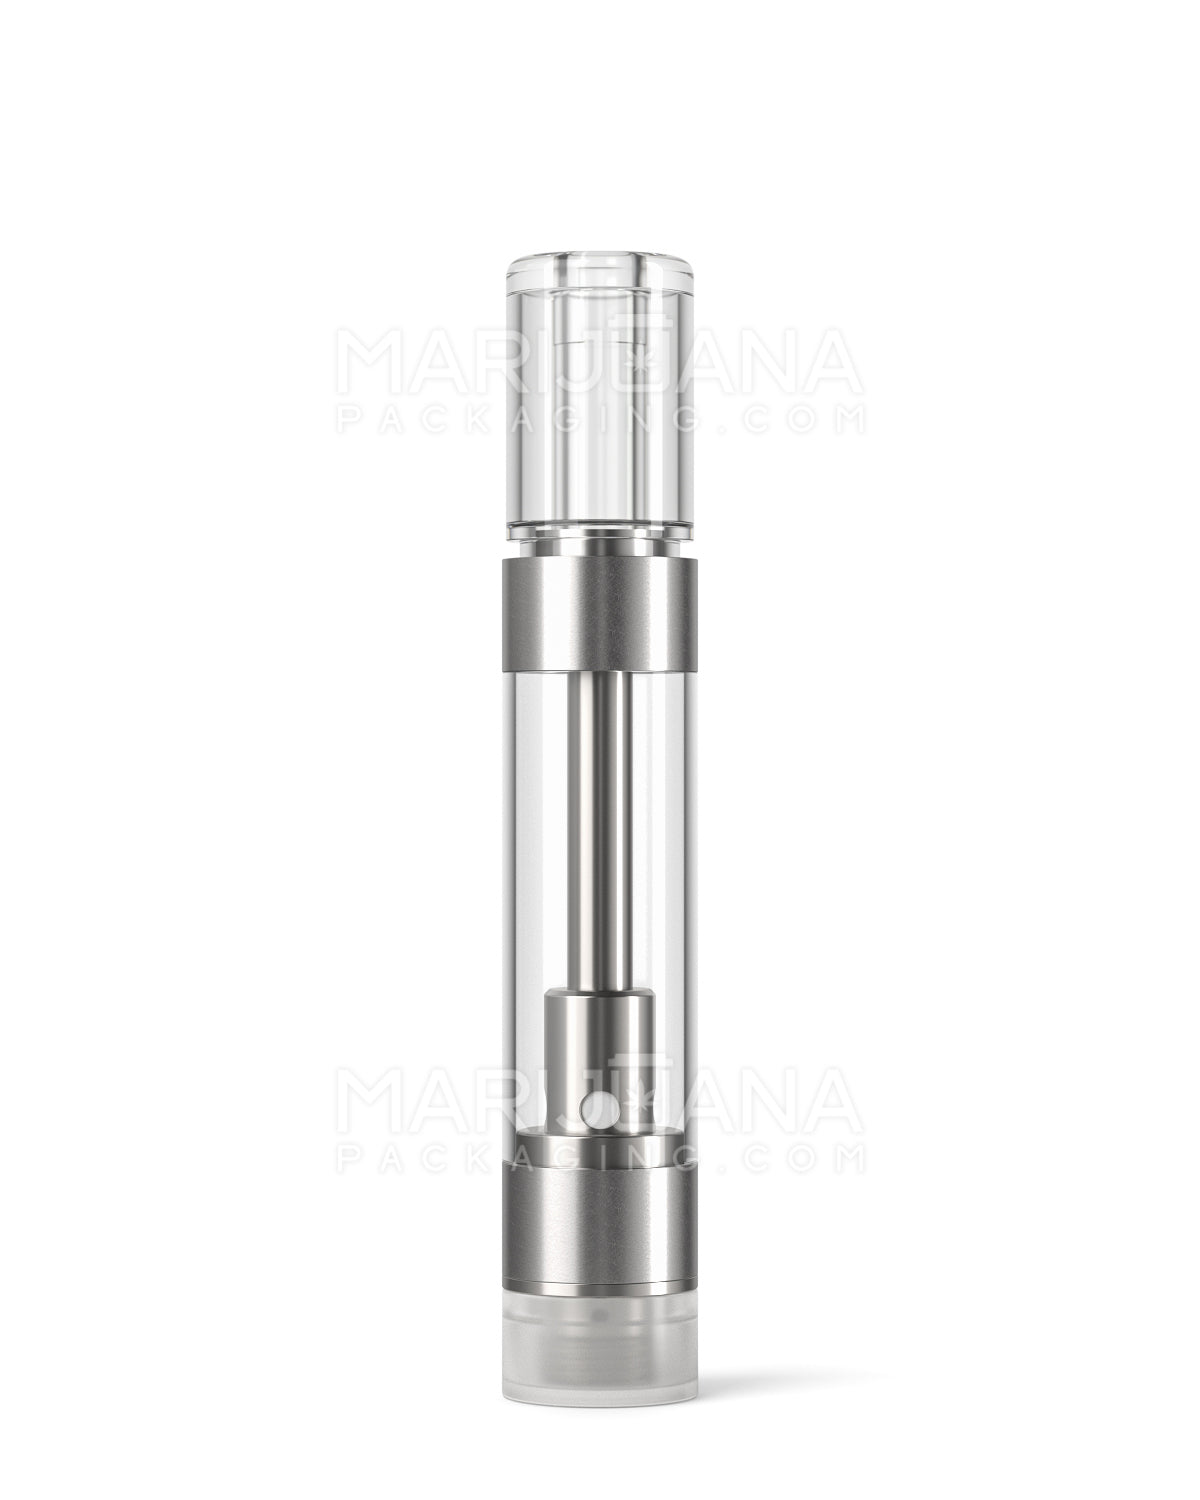 CCELL | Liquid6 Reactor Plastic Vape Cartridge with Barrel Clear Plastic Mouthpiece | 1mL - Press On - 100 Count - 3